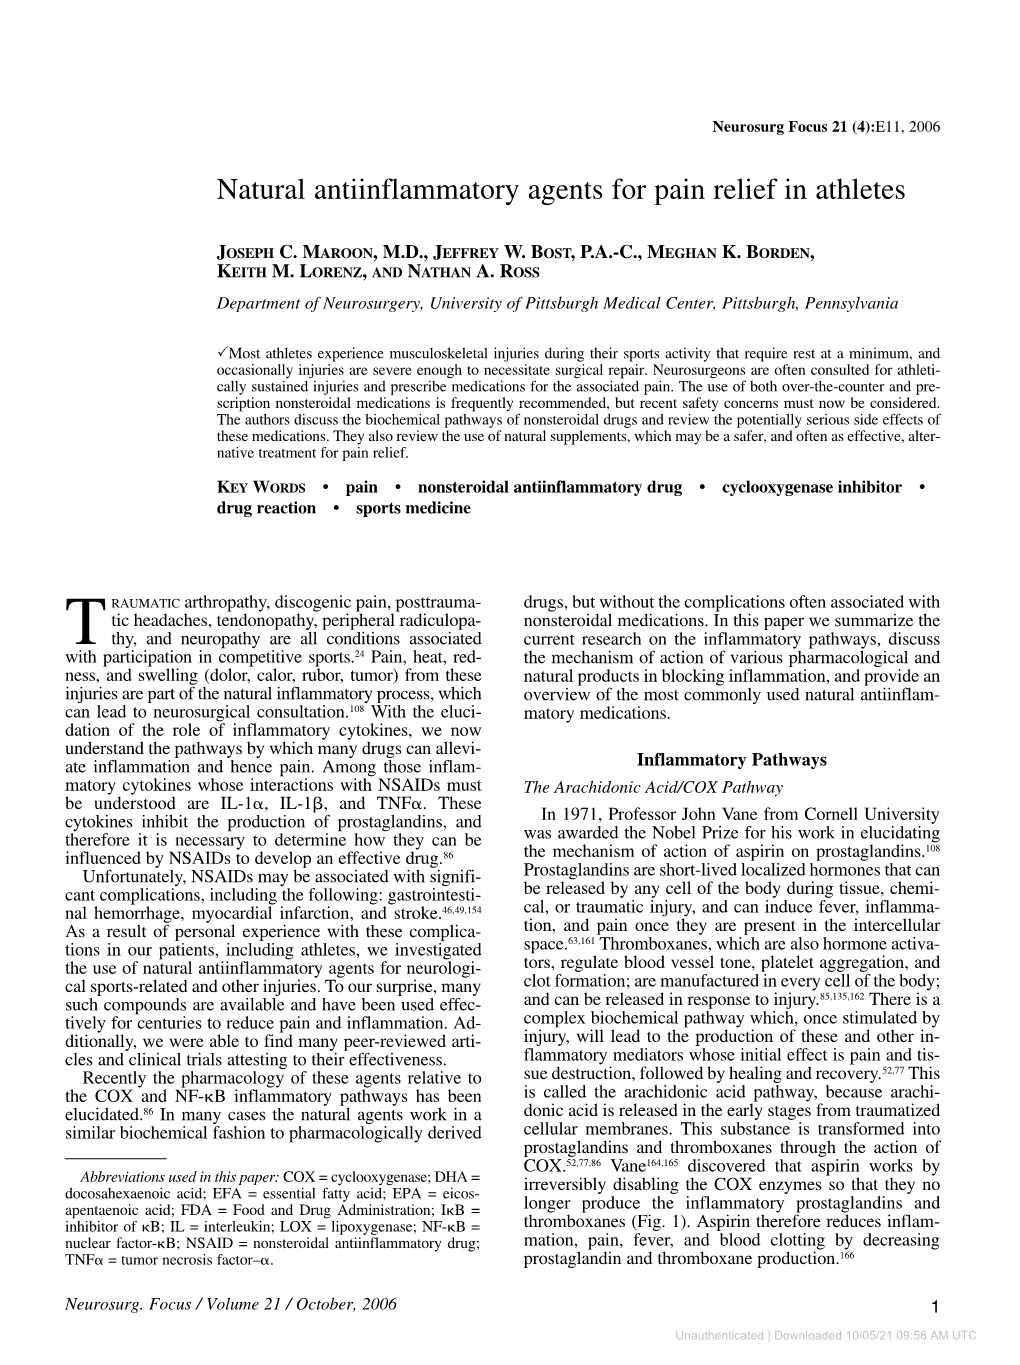 Natural Antiinflammatory Agents for Pain Relief in Athletes